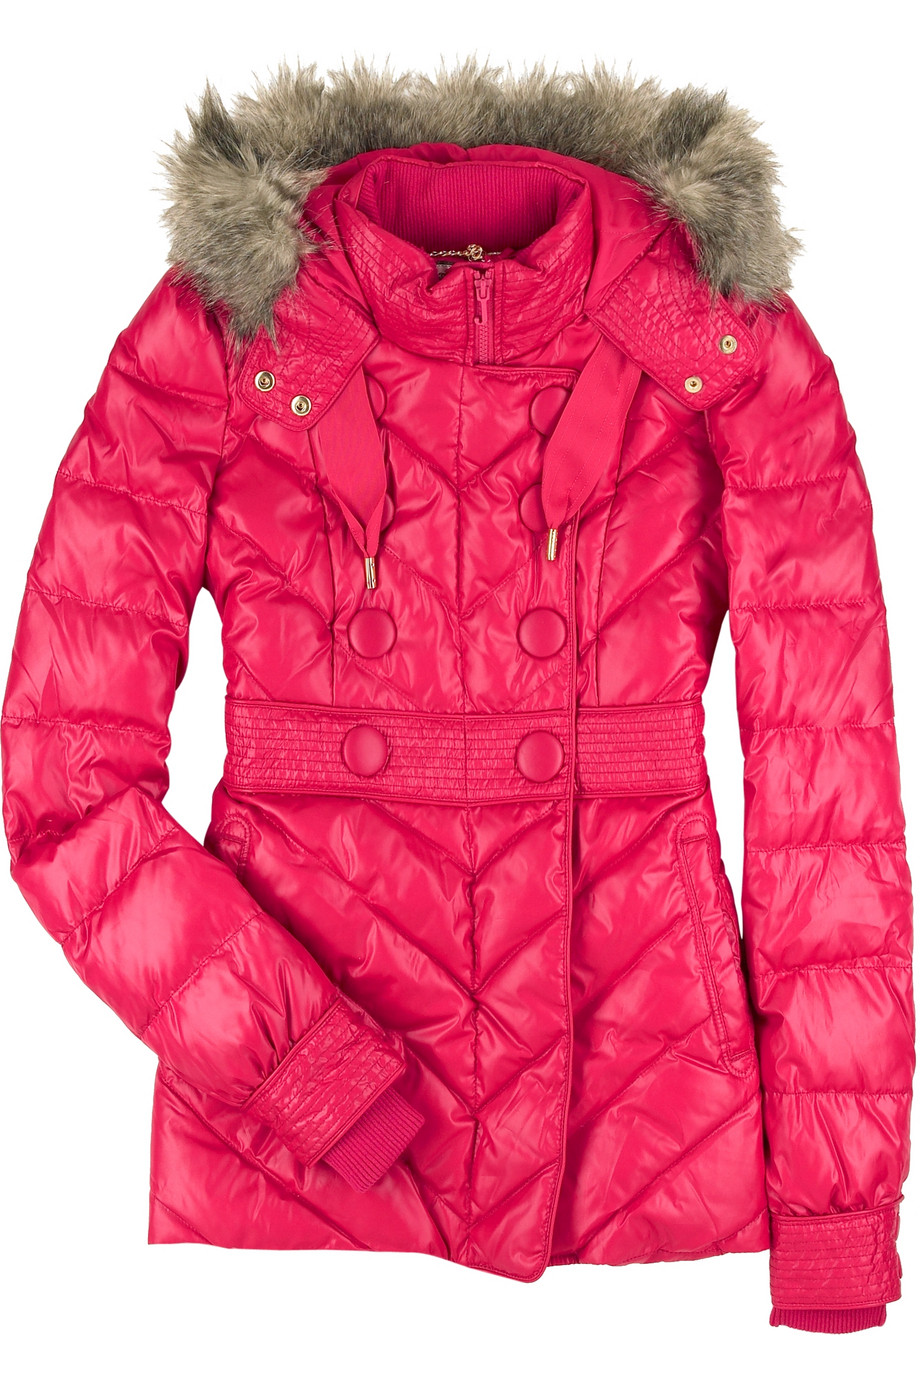 Juicy Couture Quilted Satin Jacket in Pink | Lyst